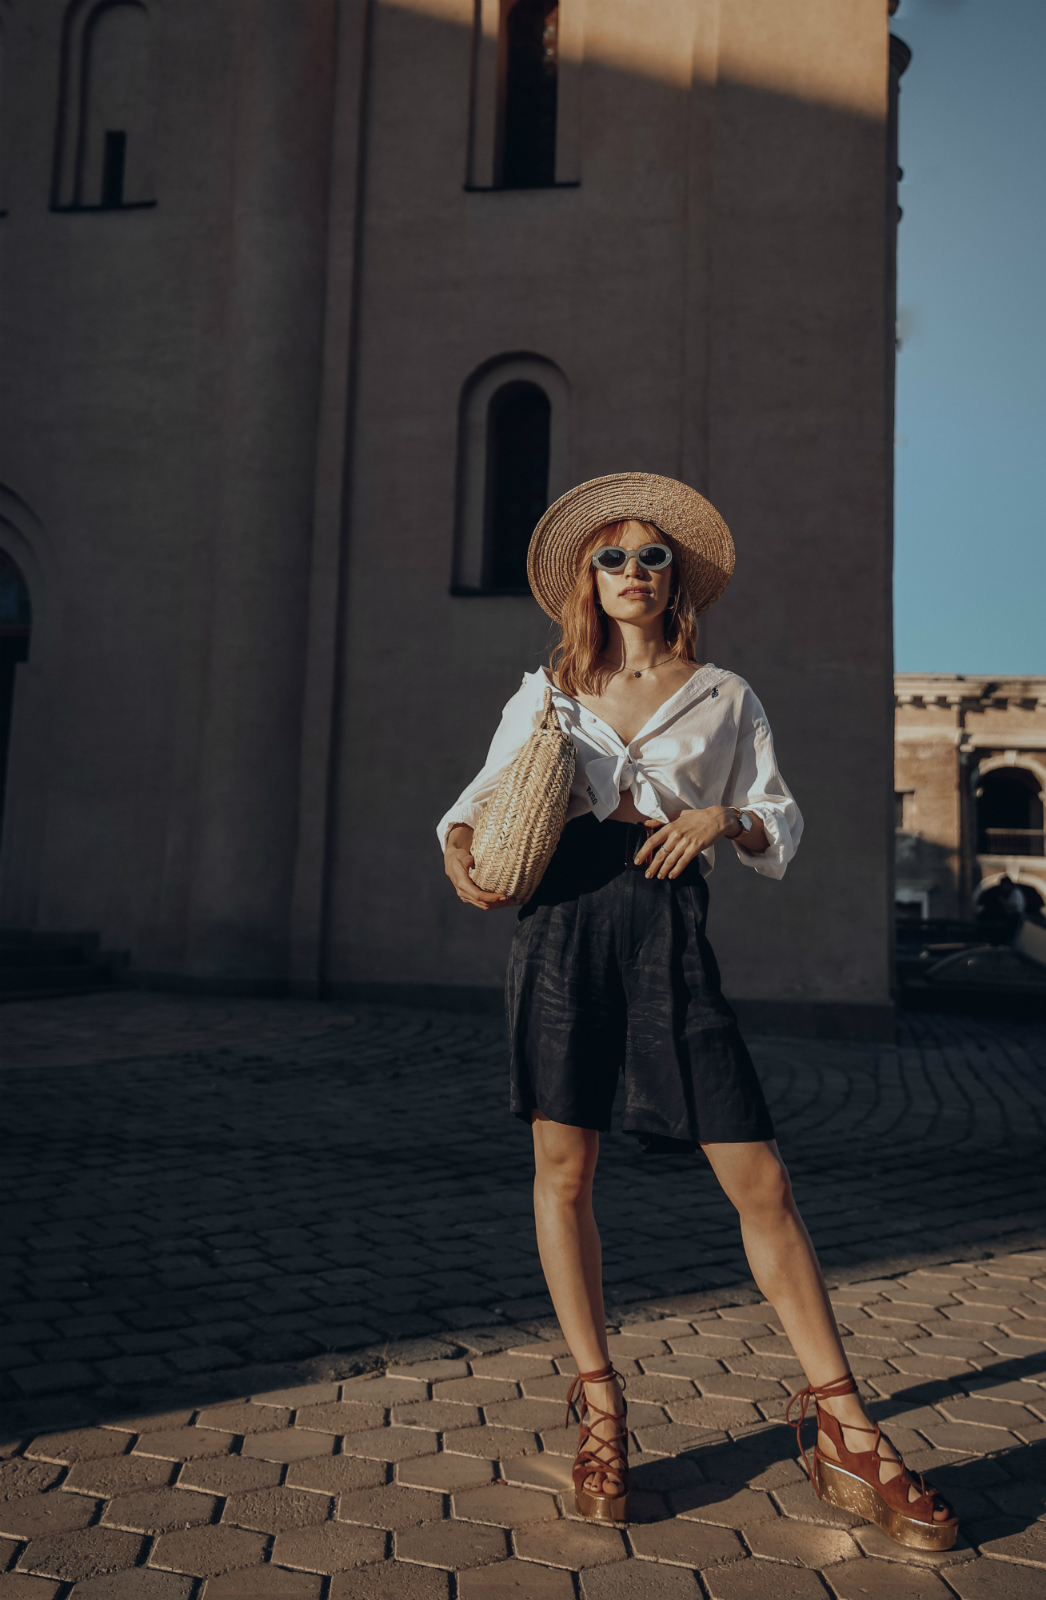 valeria sytnik shows which clothes take to hot countries for your next trip